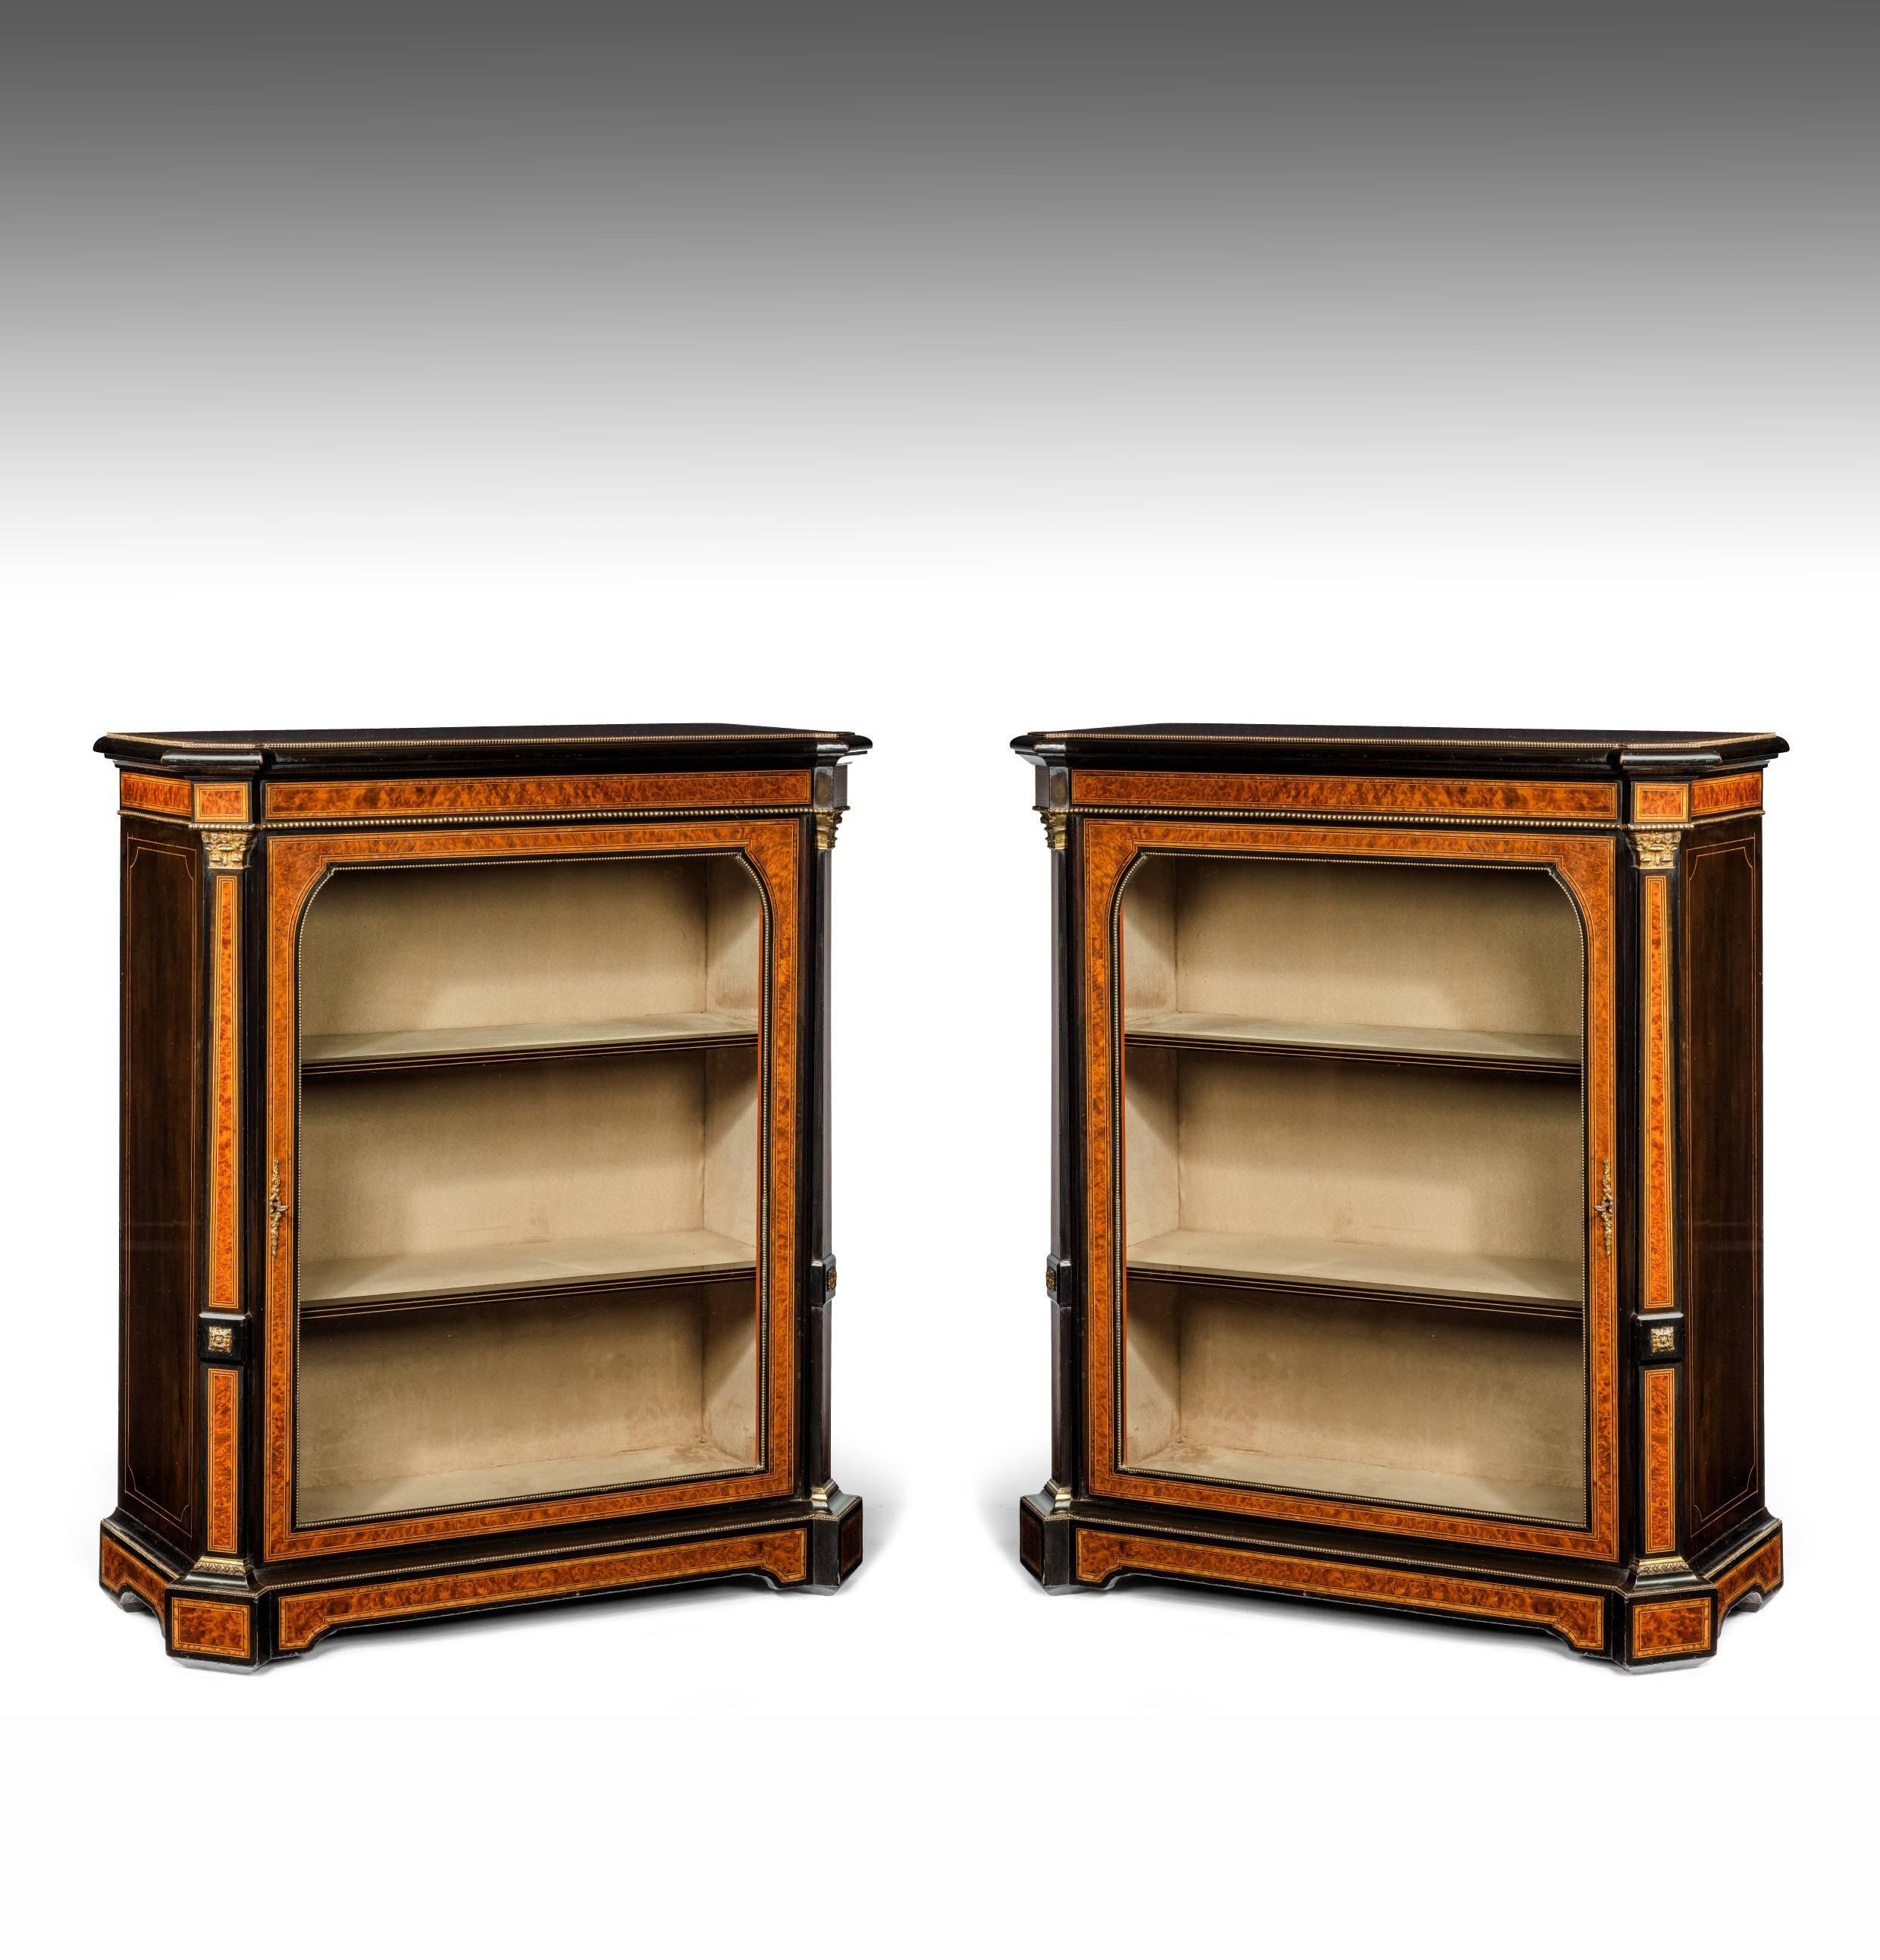 A delightful pair of ebonised amboyna and pollard oak inlaid pier cabinets dating to 1860. 

This pair of cabinets are of the highest quality being finely inlaid and banded with amboyna, pollard oak with boxwood. 
Please also bear in mind that